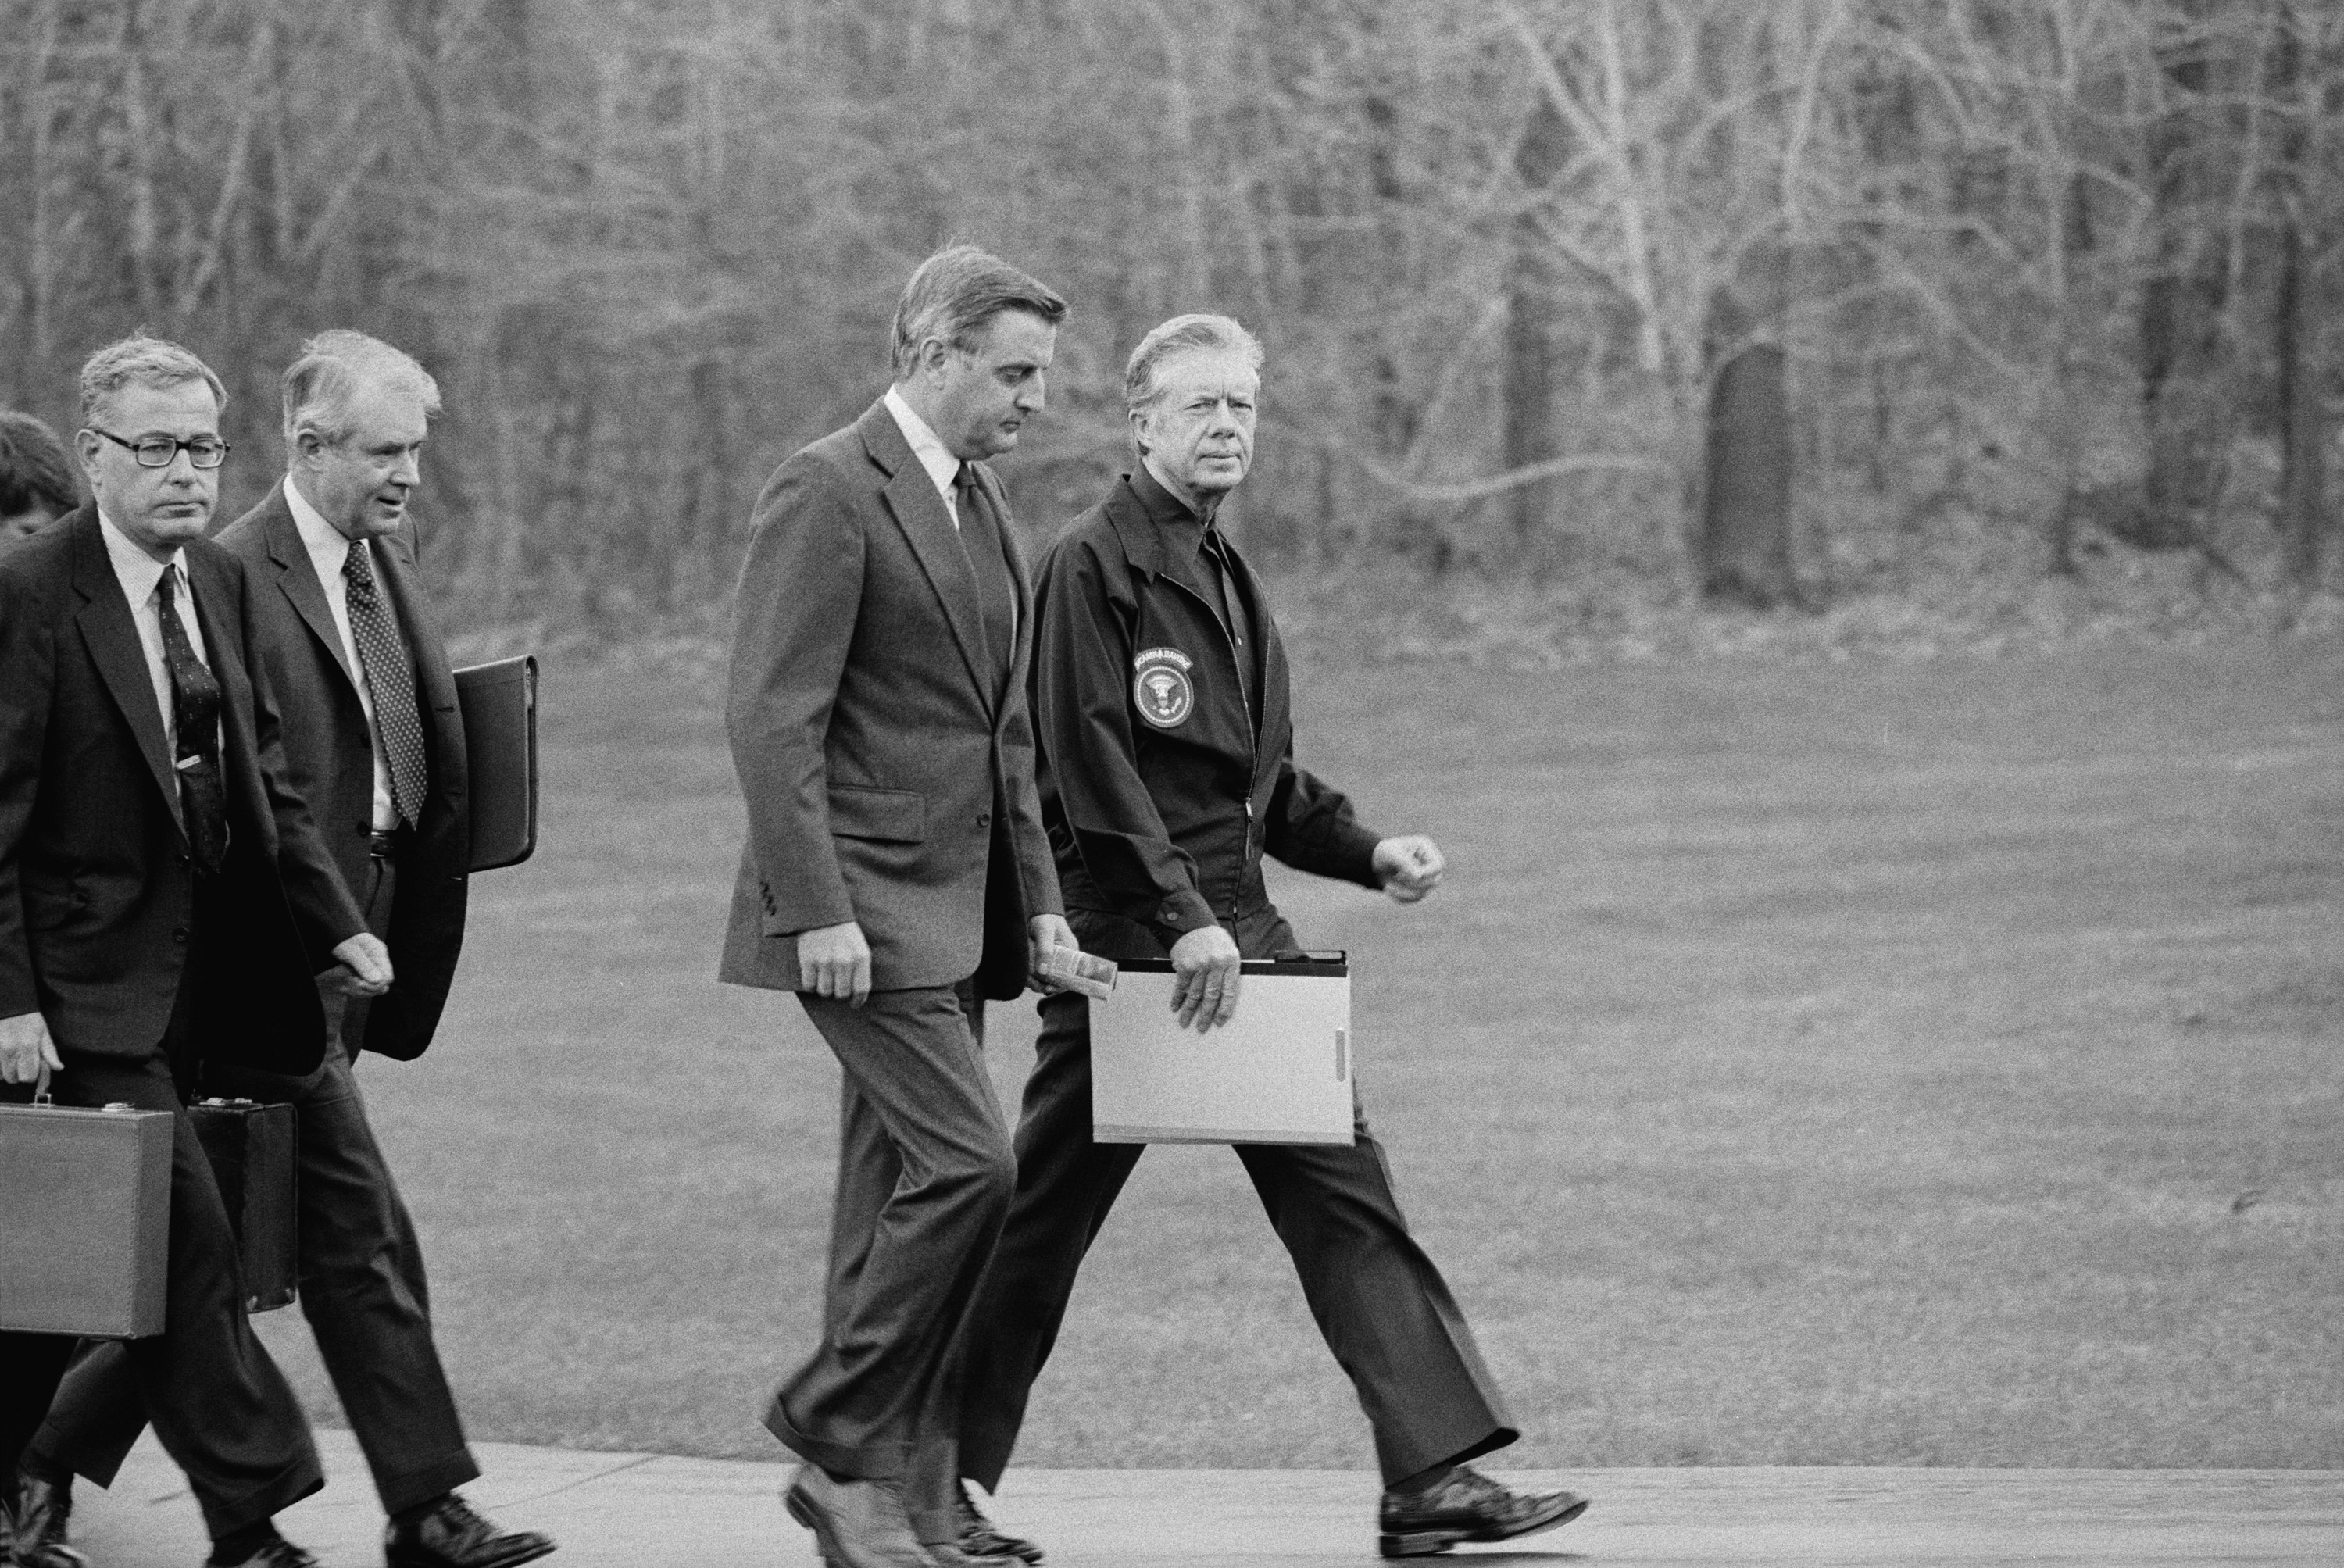 President Jimmy Carter, Vice President Walter Mondale, Secretary of State Cyrus Vance, and Secretary of Defense Harold Brown after disembarking from their helicopter to meet about Iran hostage crisis